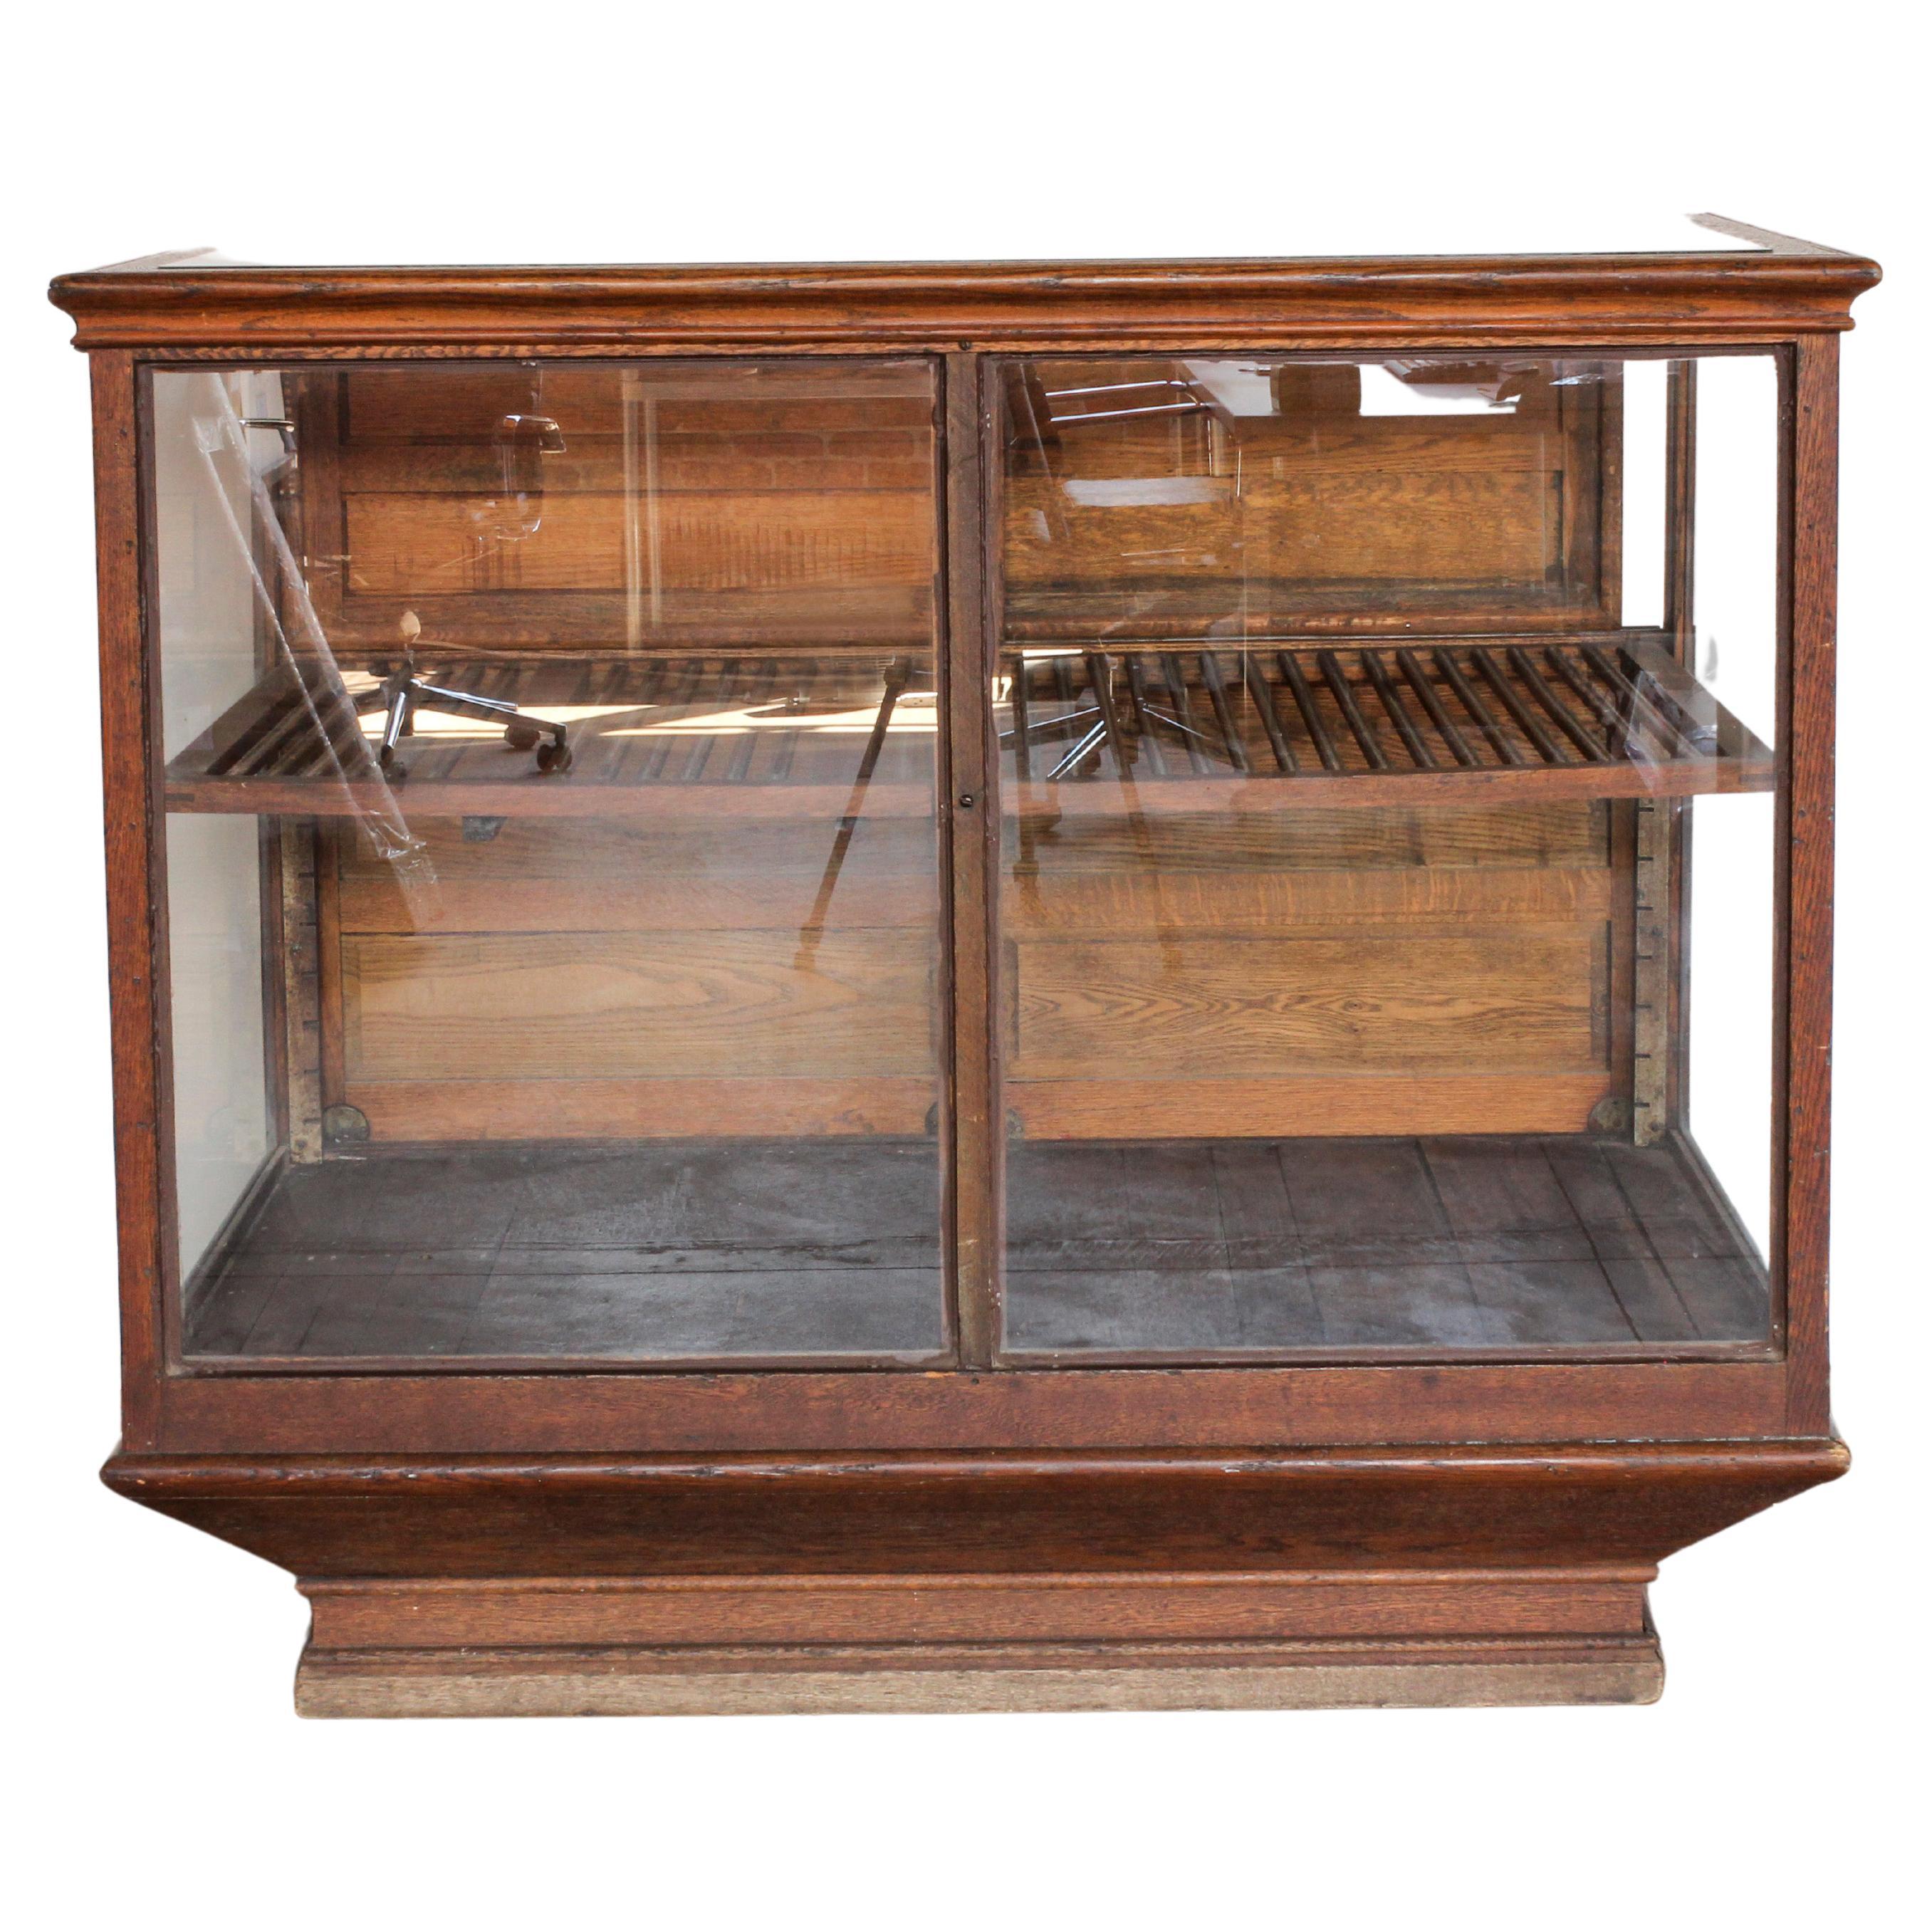 Antique oak curio display case with original glass on three sides. Slatted wood shelf at 16